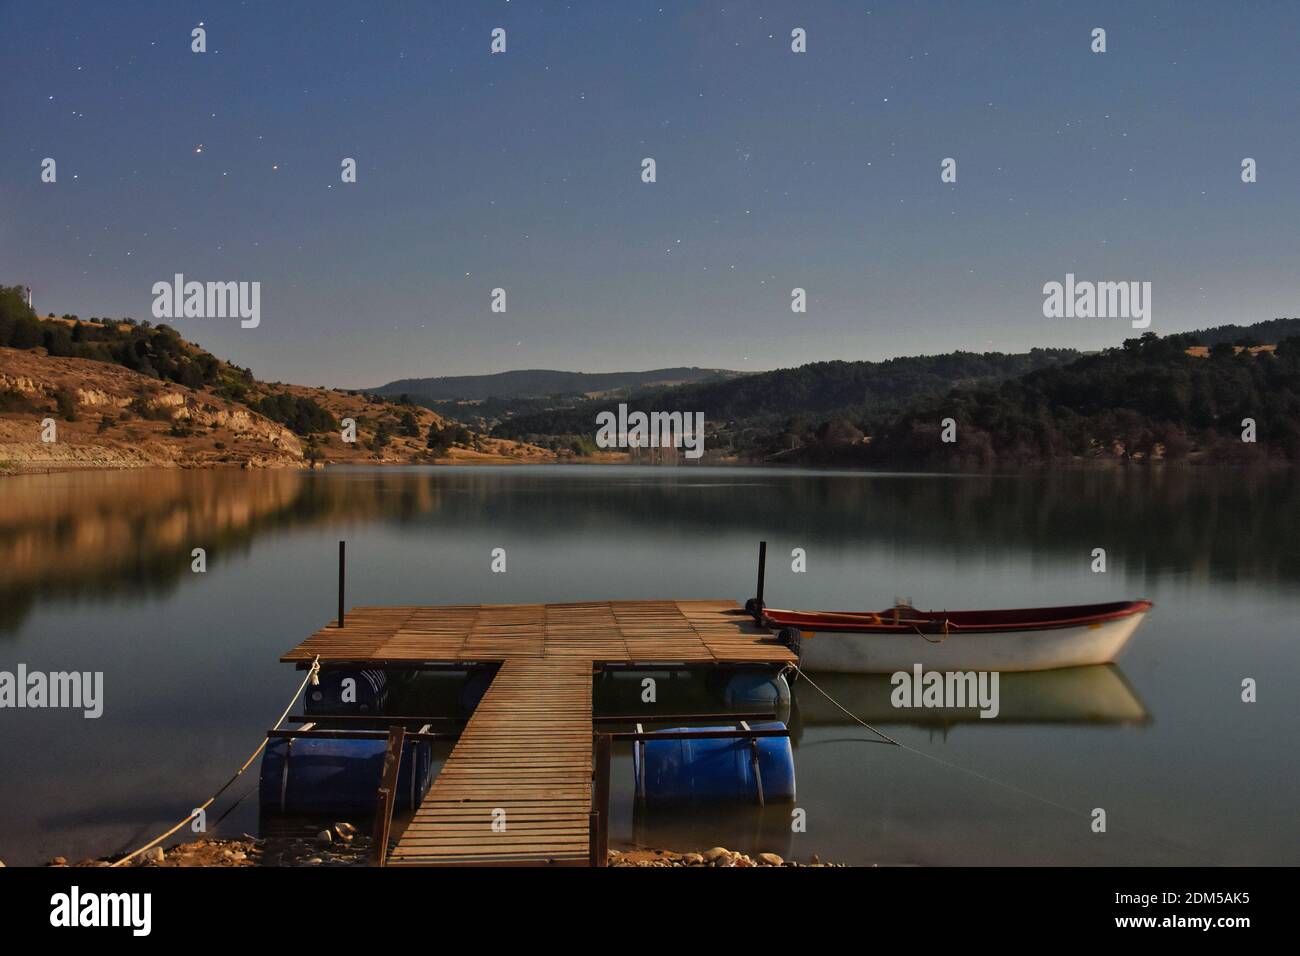 Boat Moored On Lake Against Sky At Night Stock Photo